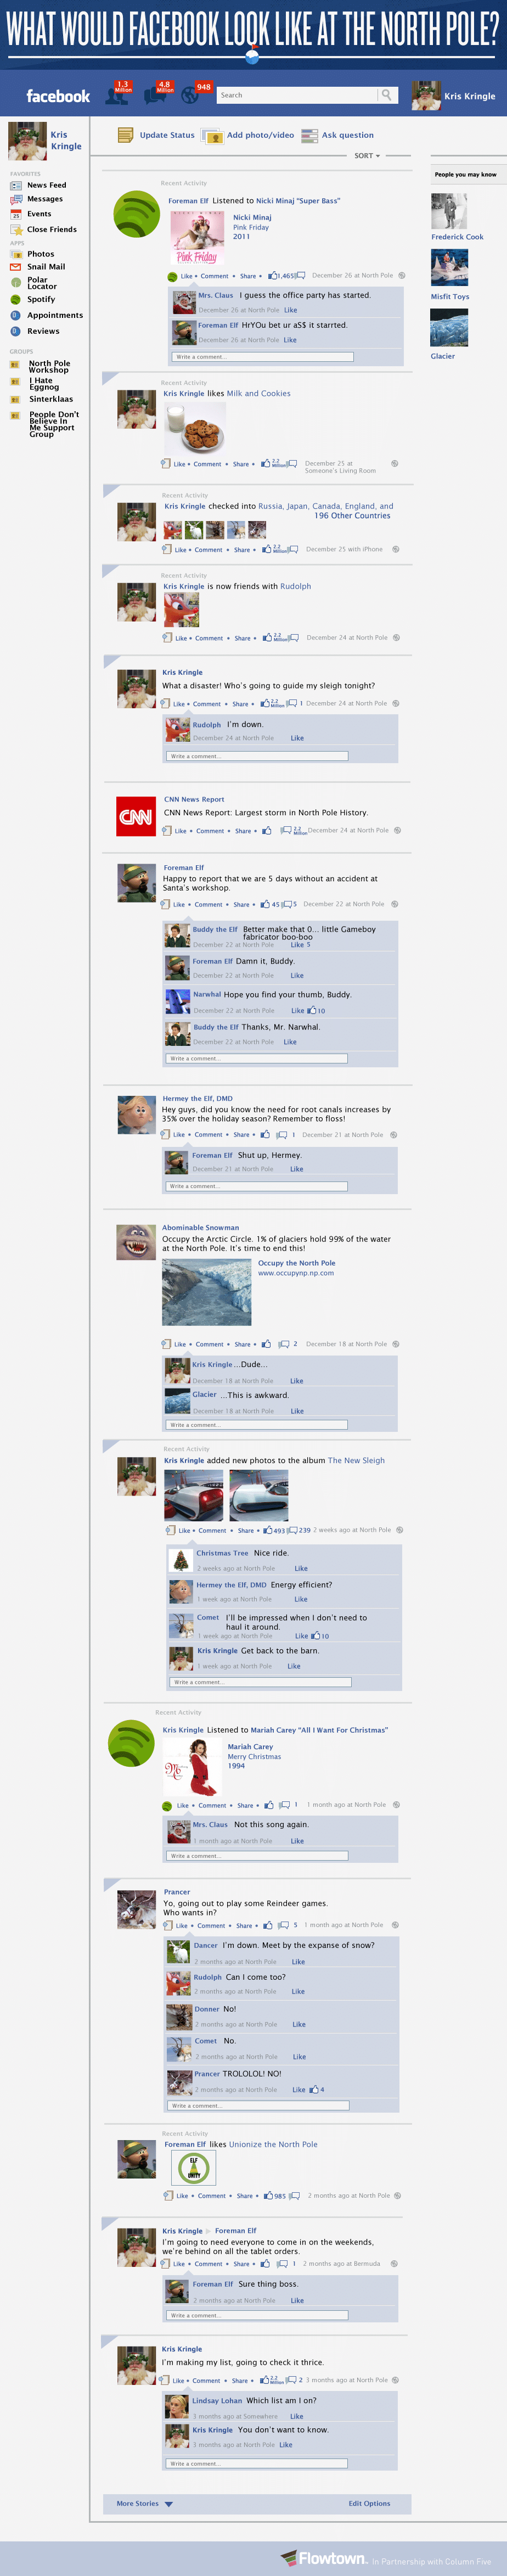 What Facebook Would Look Like At The North Pole